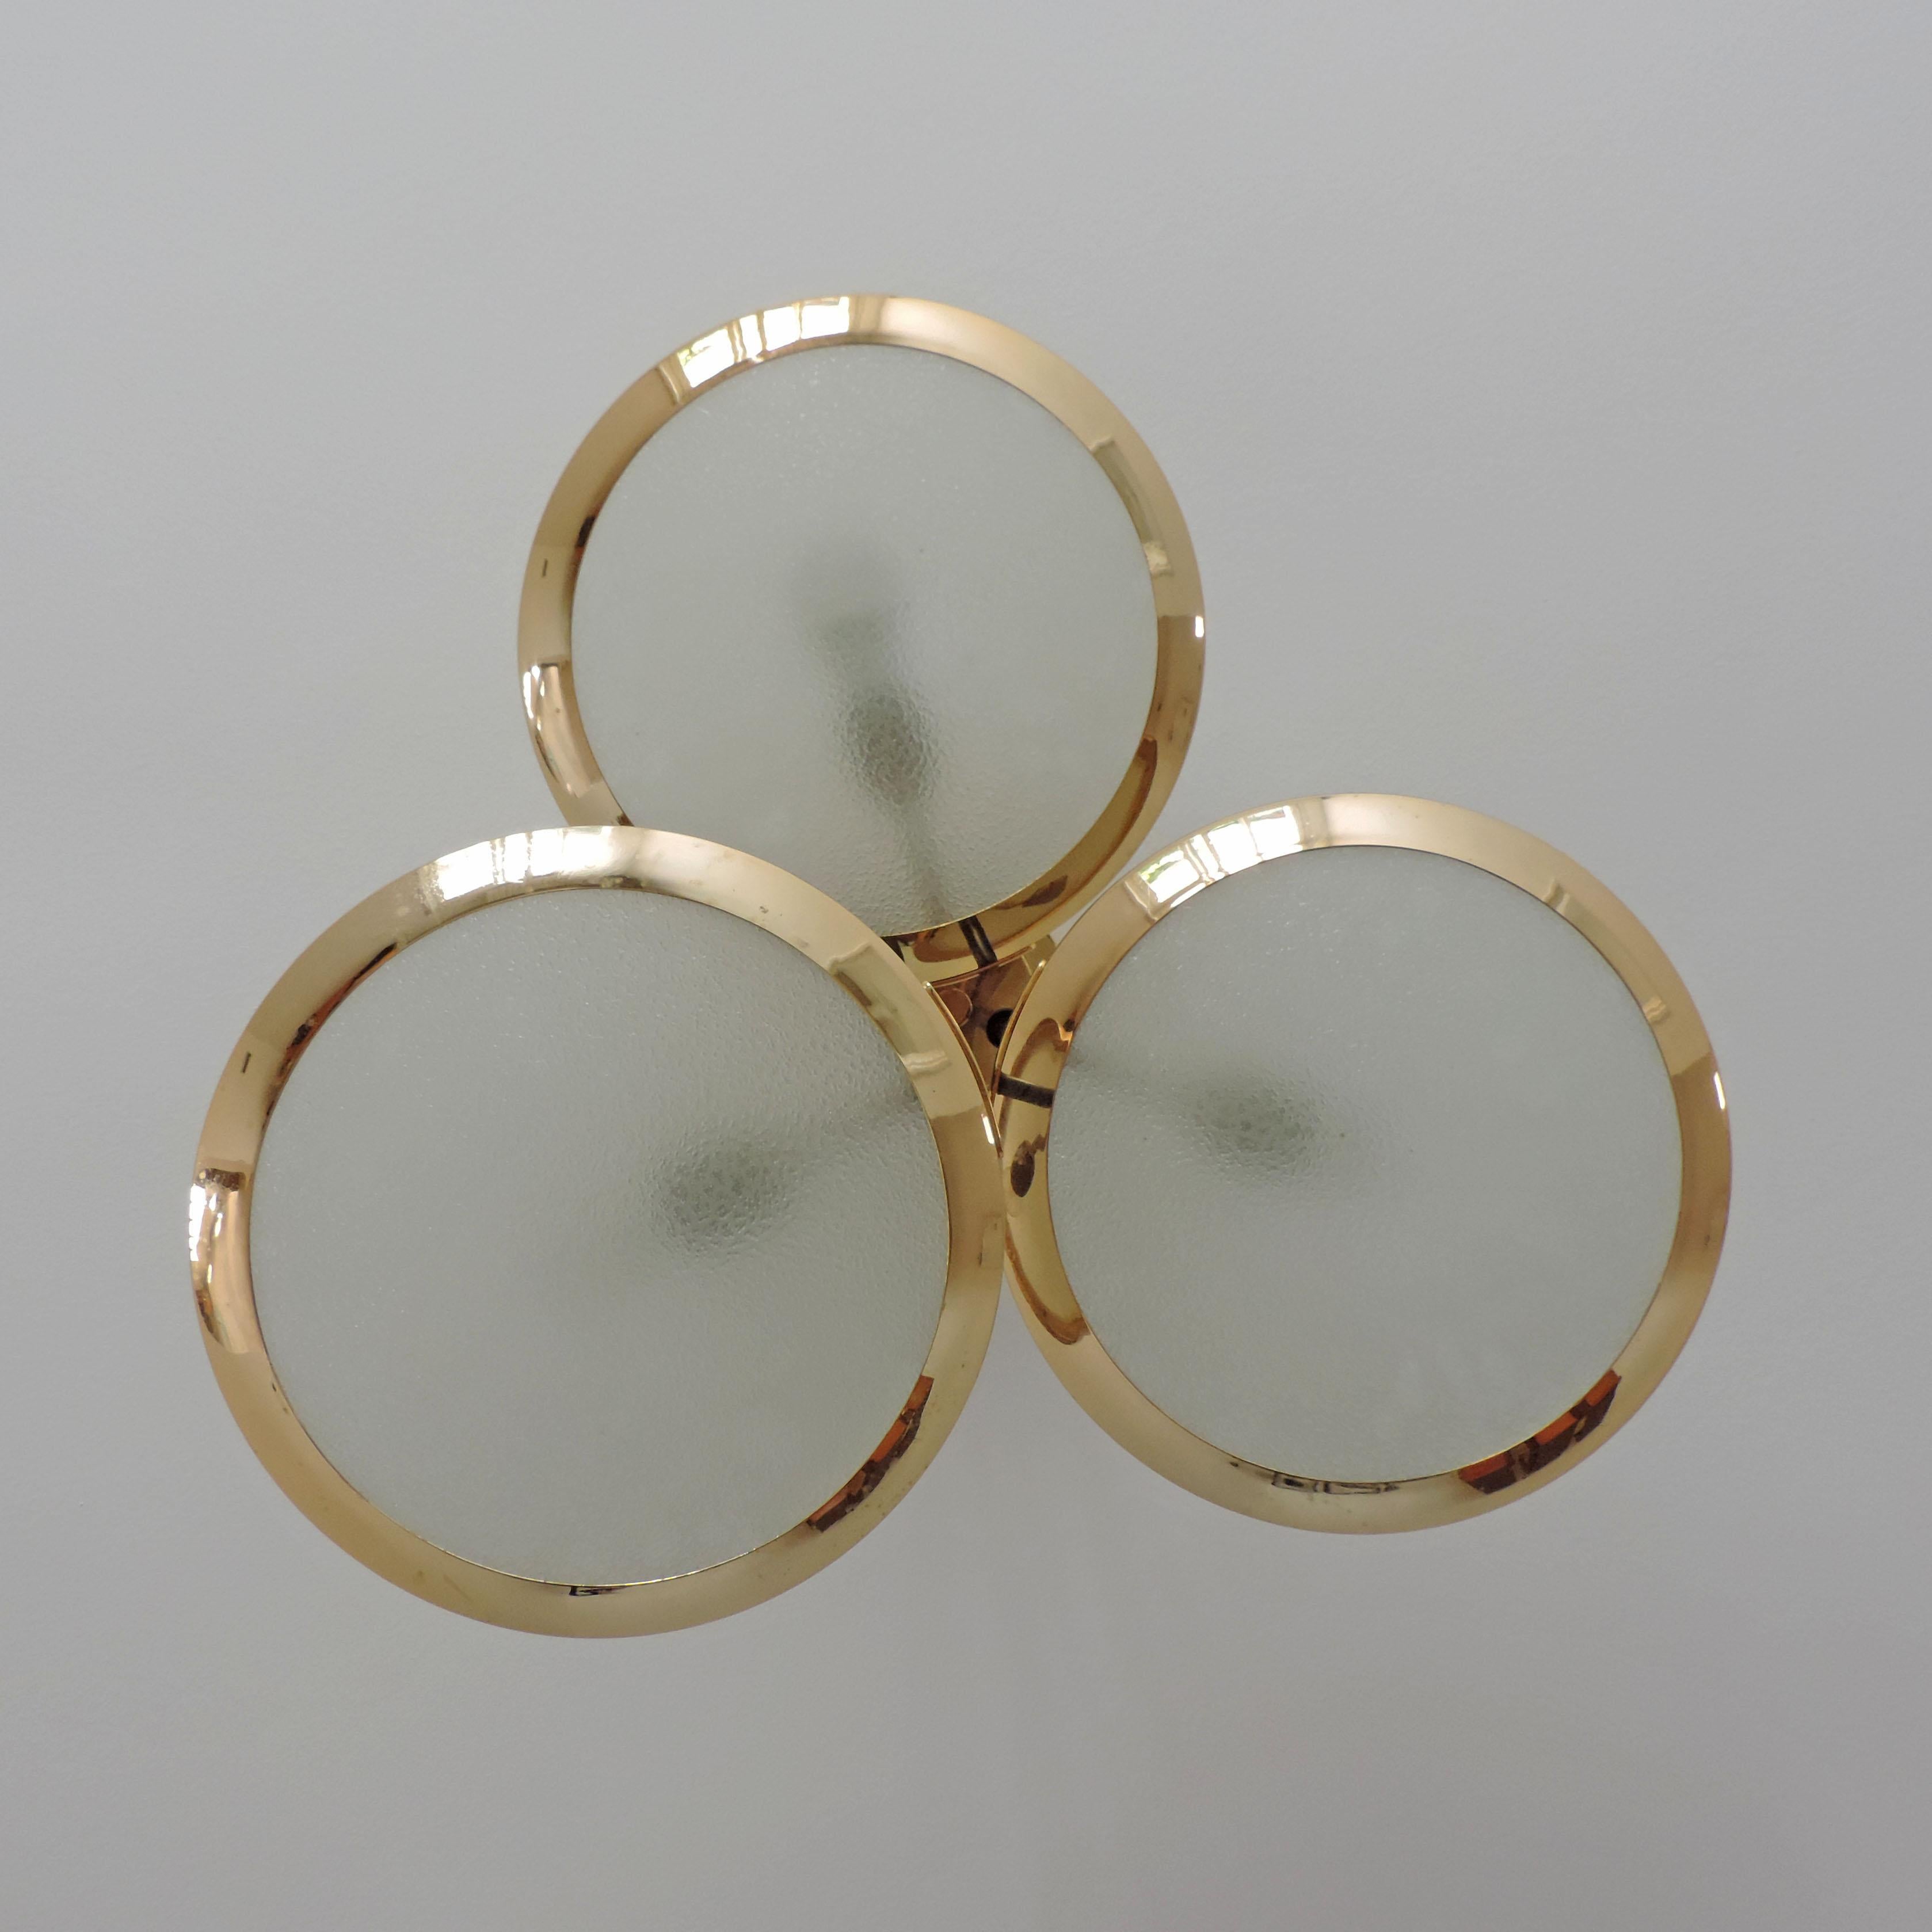 Mid-20th Century Stilnovo Three Discs Ceiling Lamp in Brass and Glass, Italy 1950s For Sale